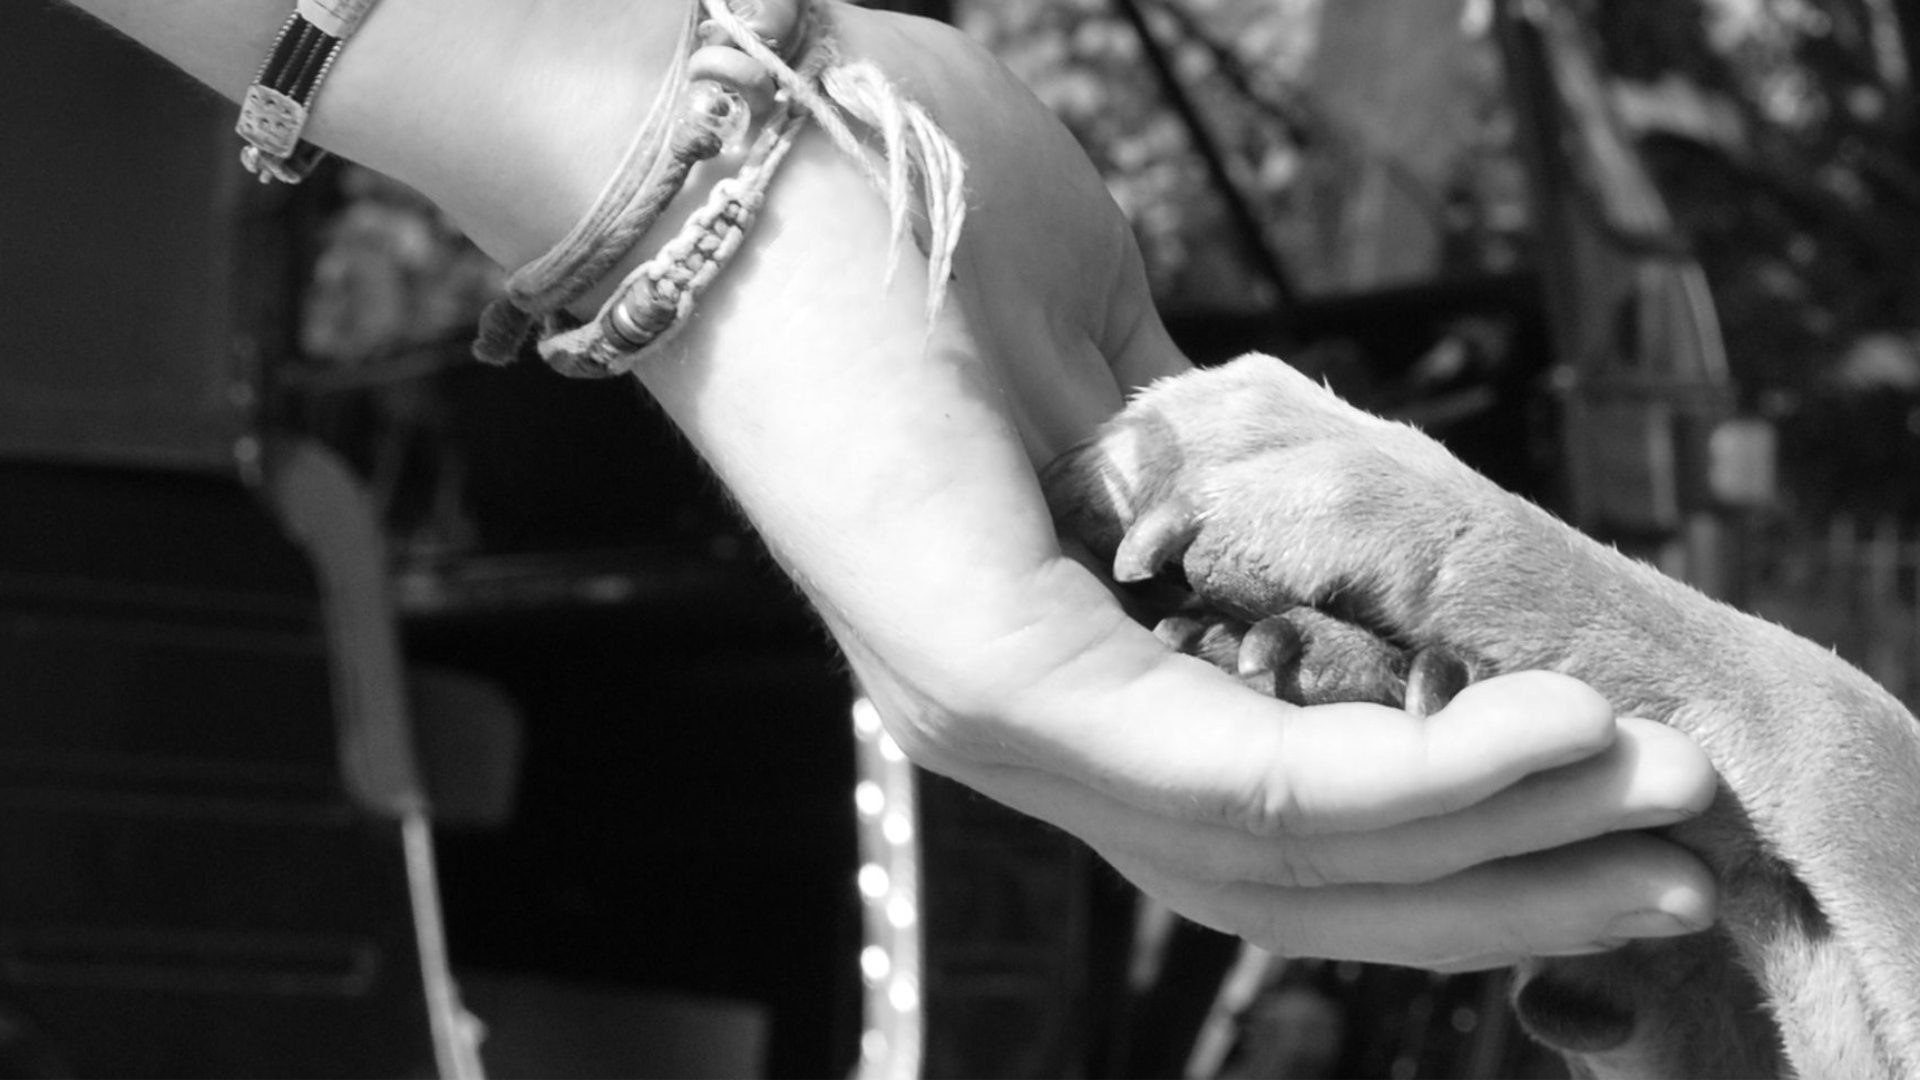 A dog's paws resting in a person's hand.